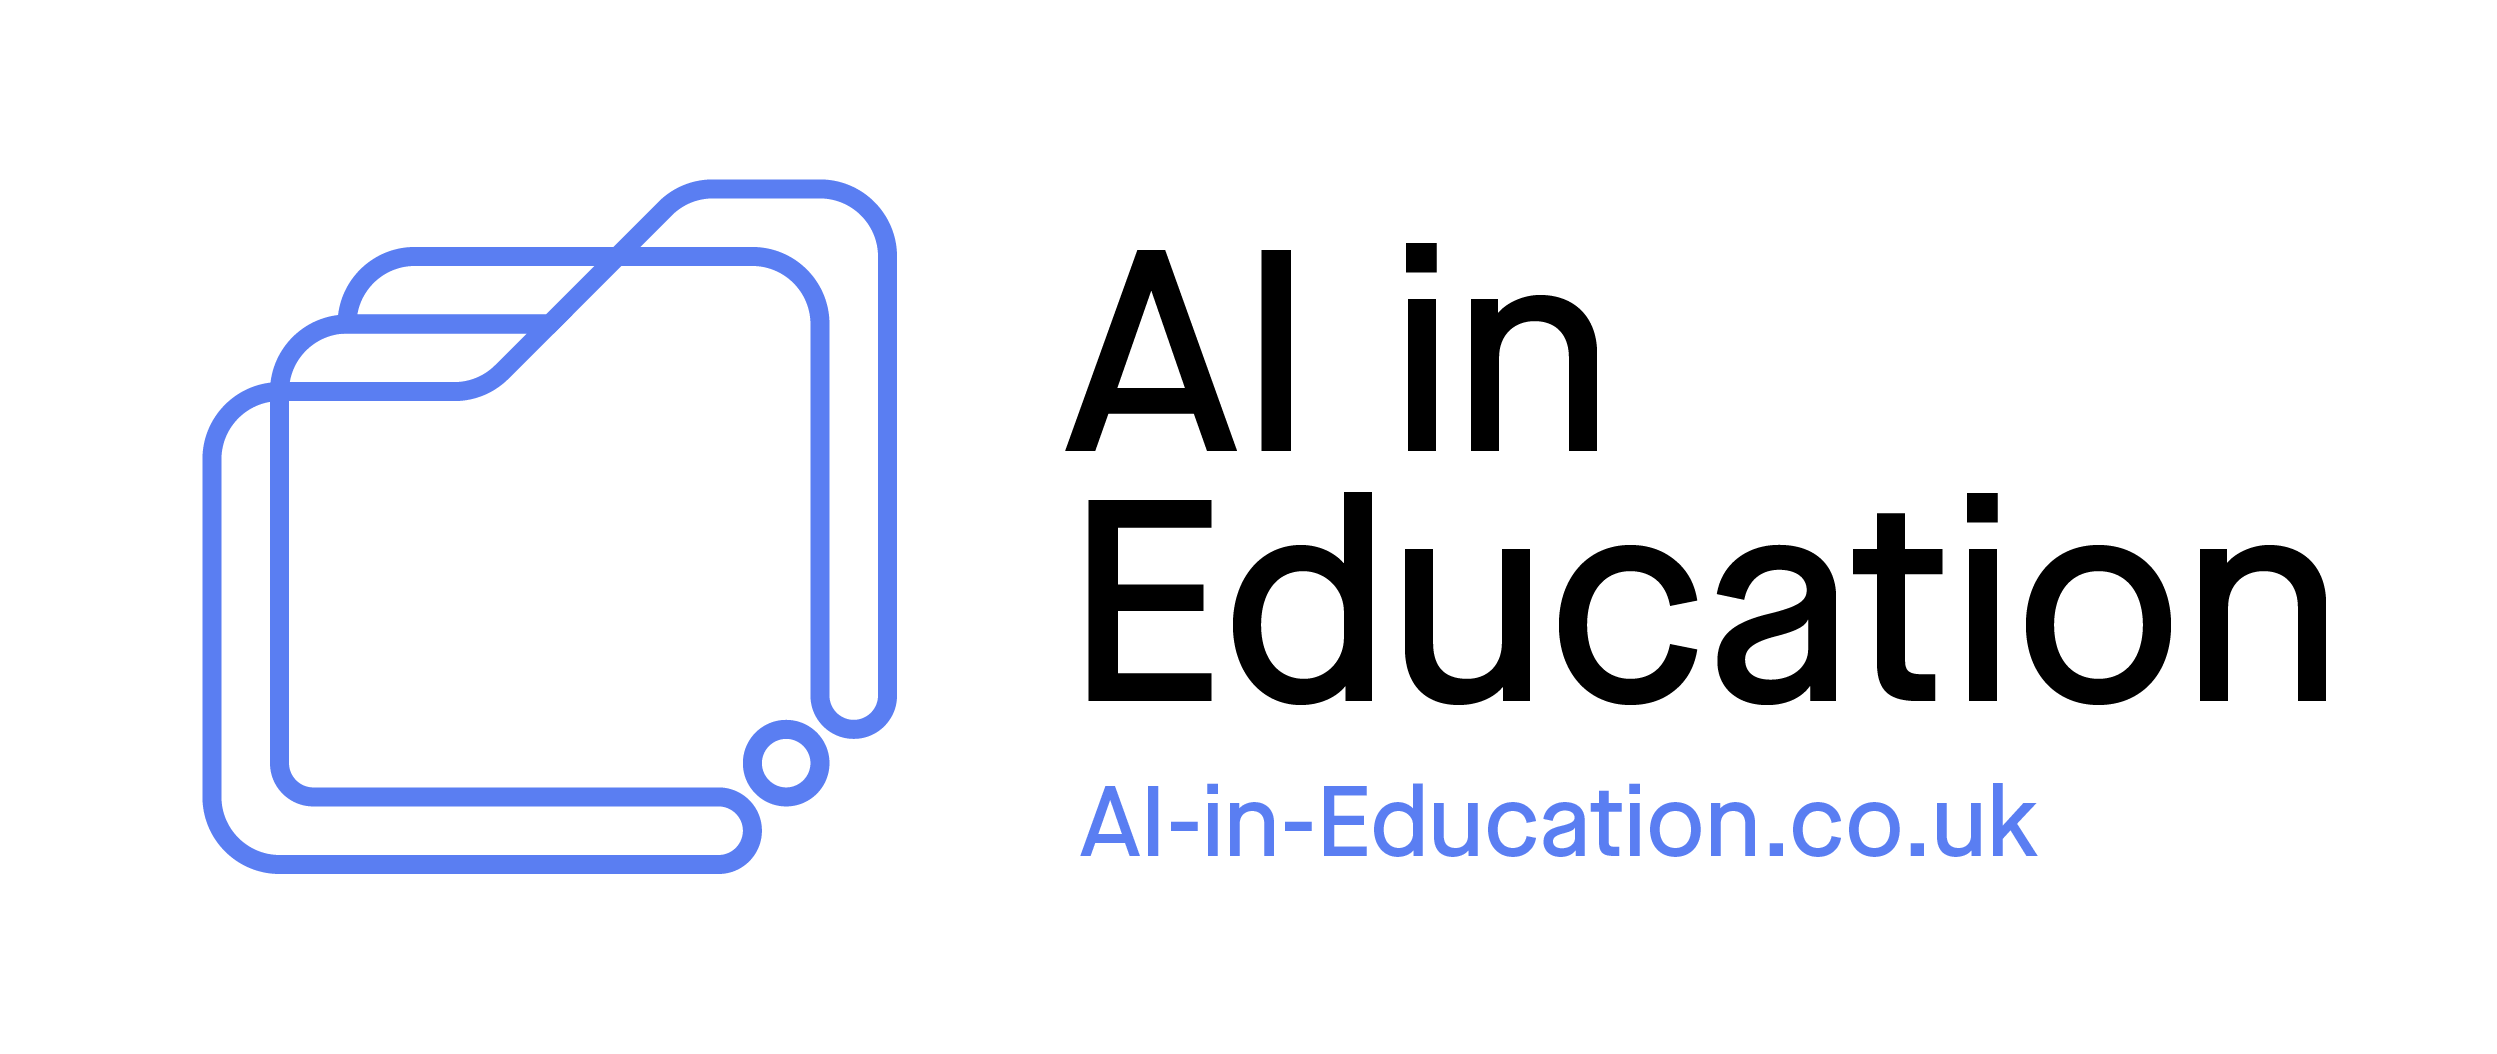 Ai in Education website